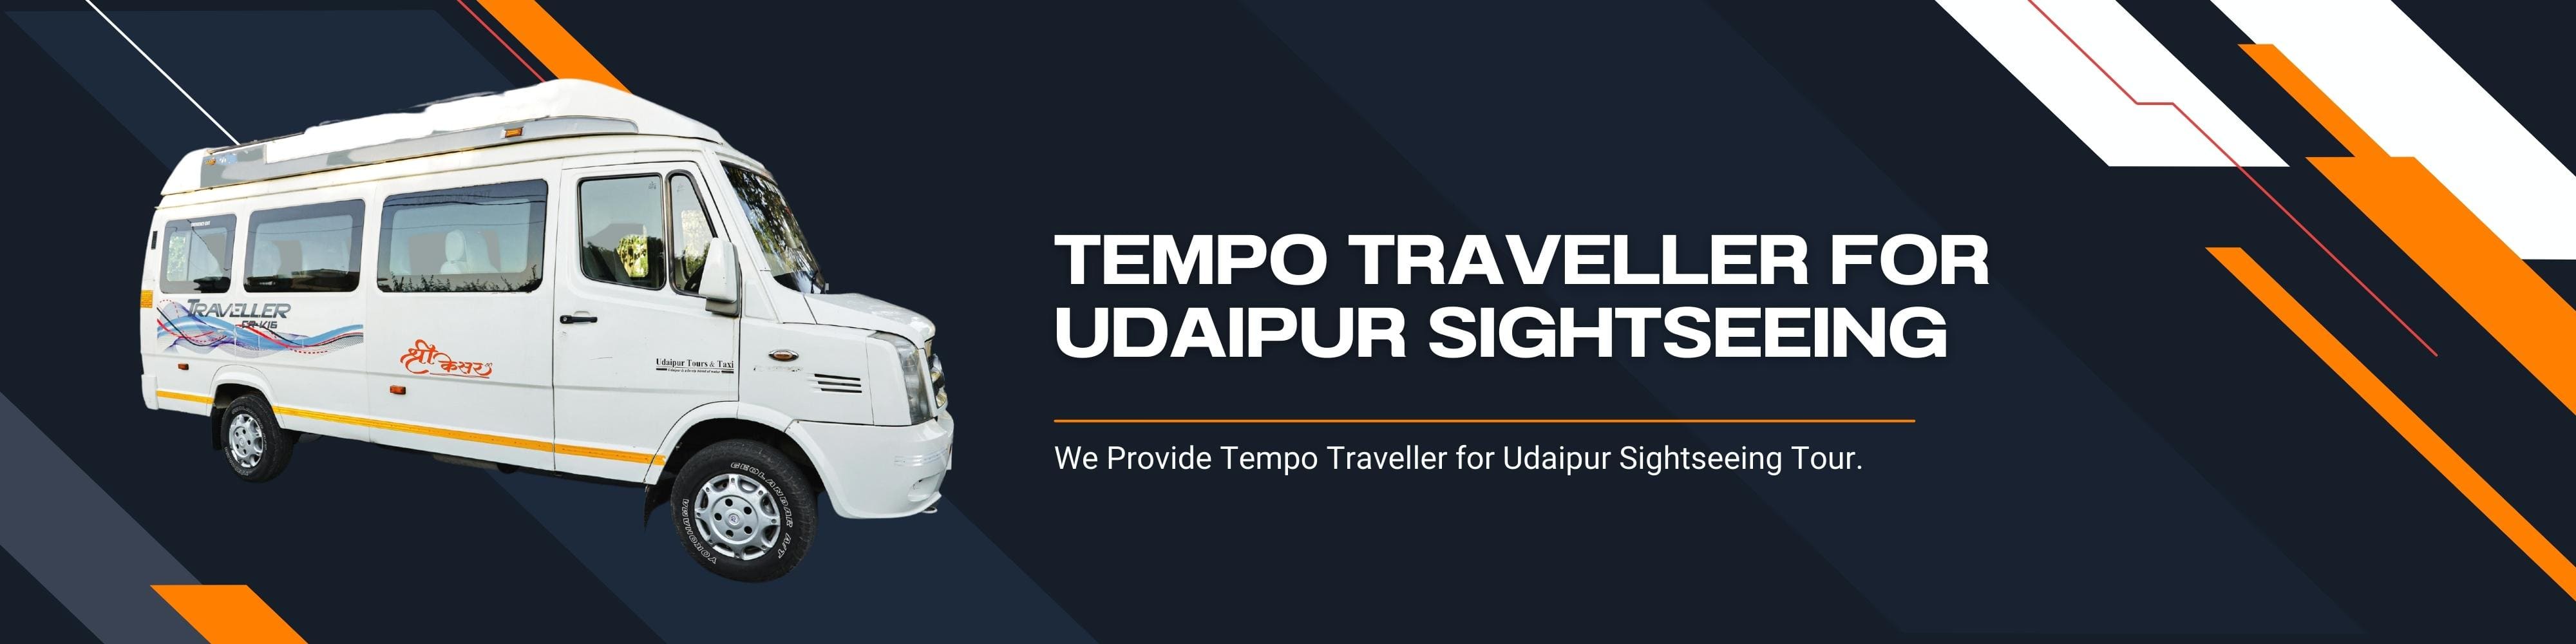 Tempo Traveller For Udaipur Sightseeing Trip / Tour